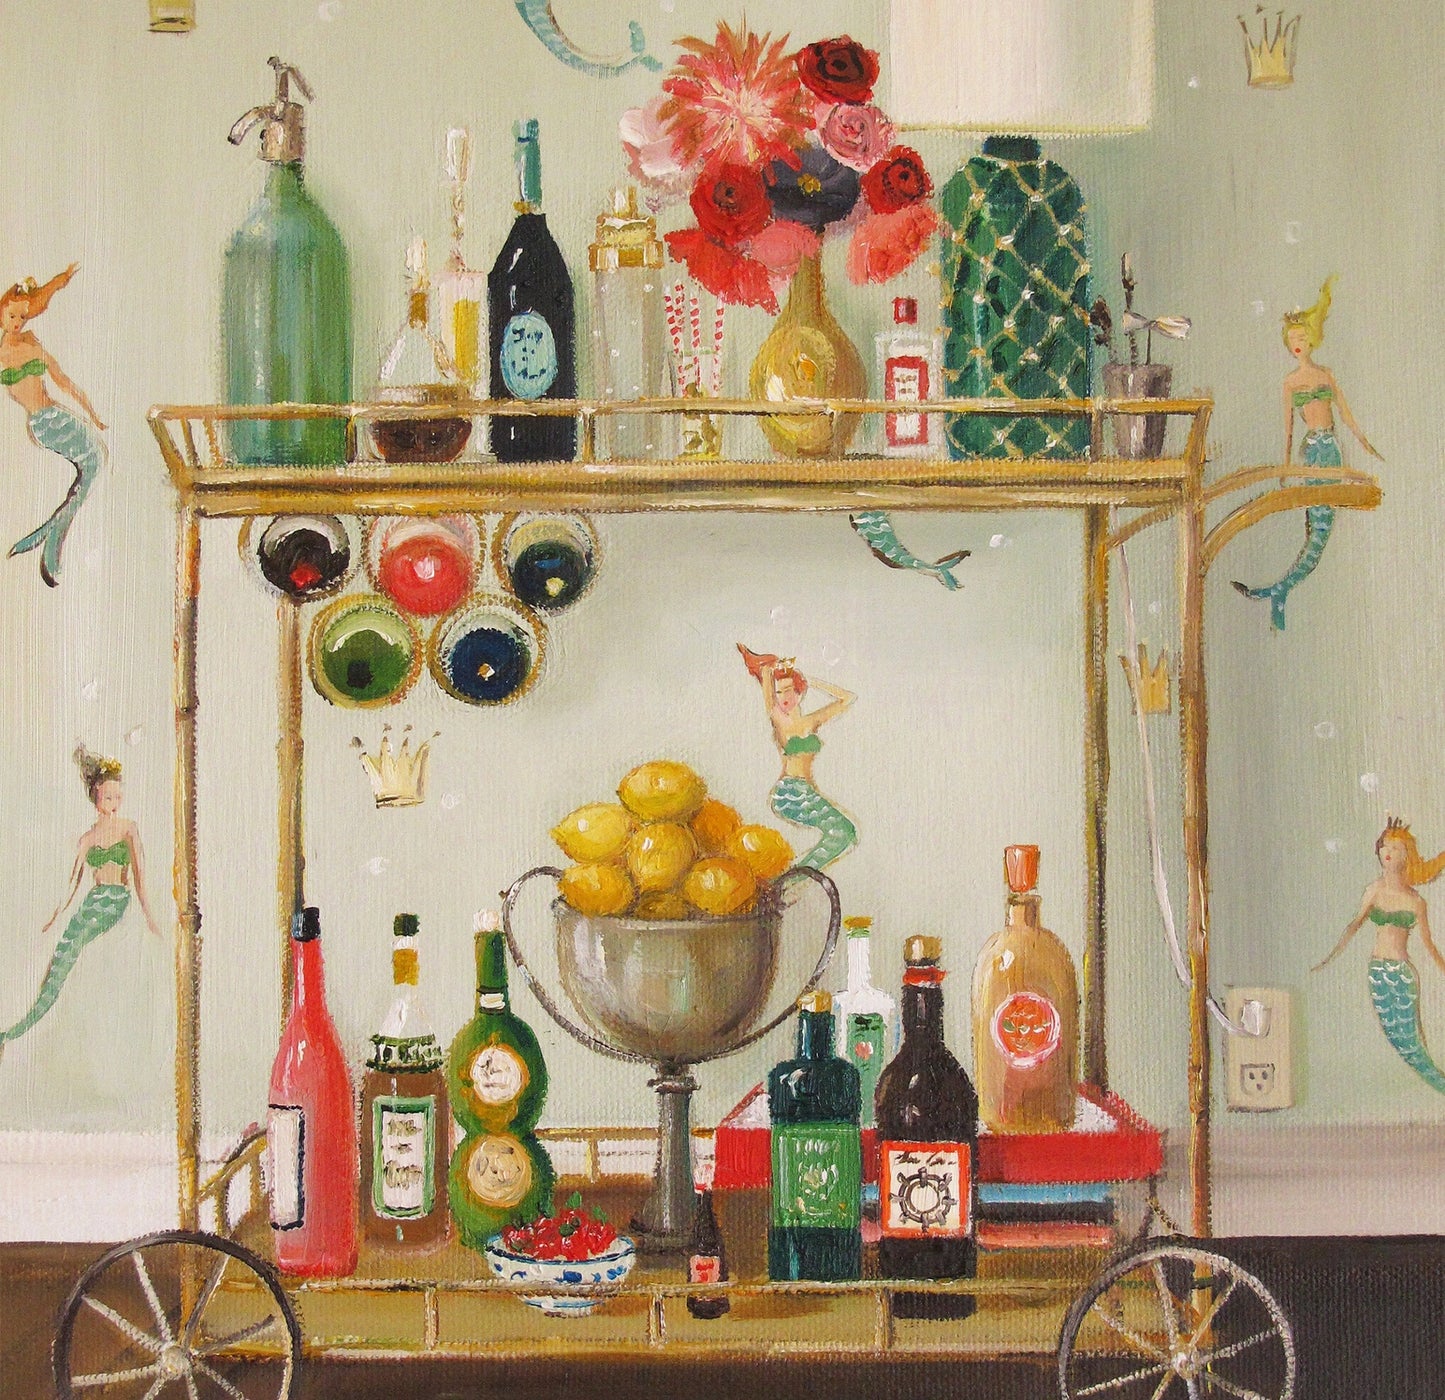 Barmaids, Open Edition Print by Janet Hill